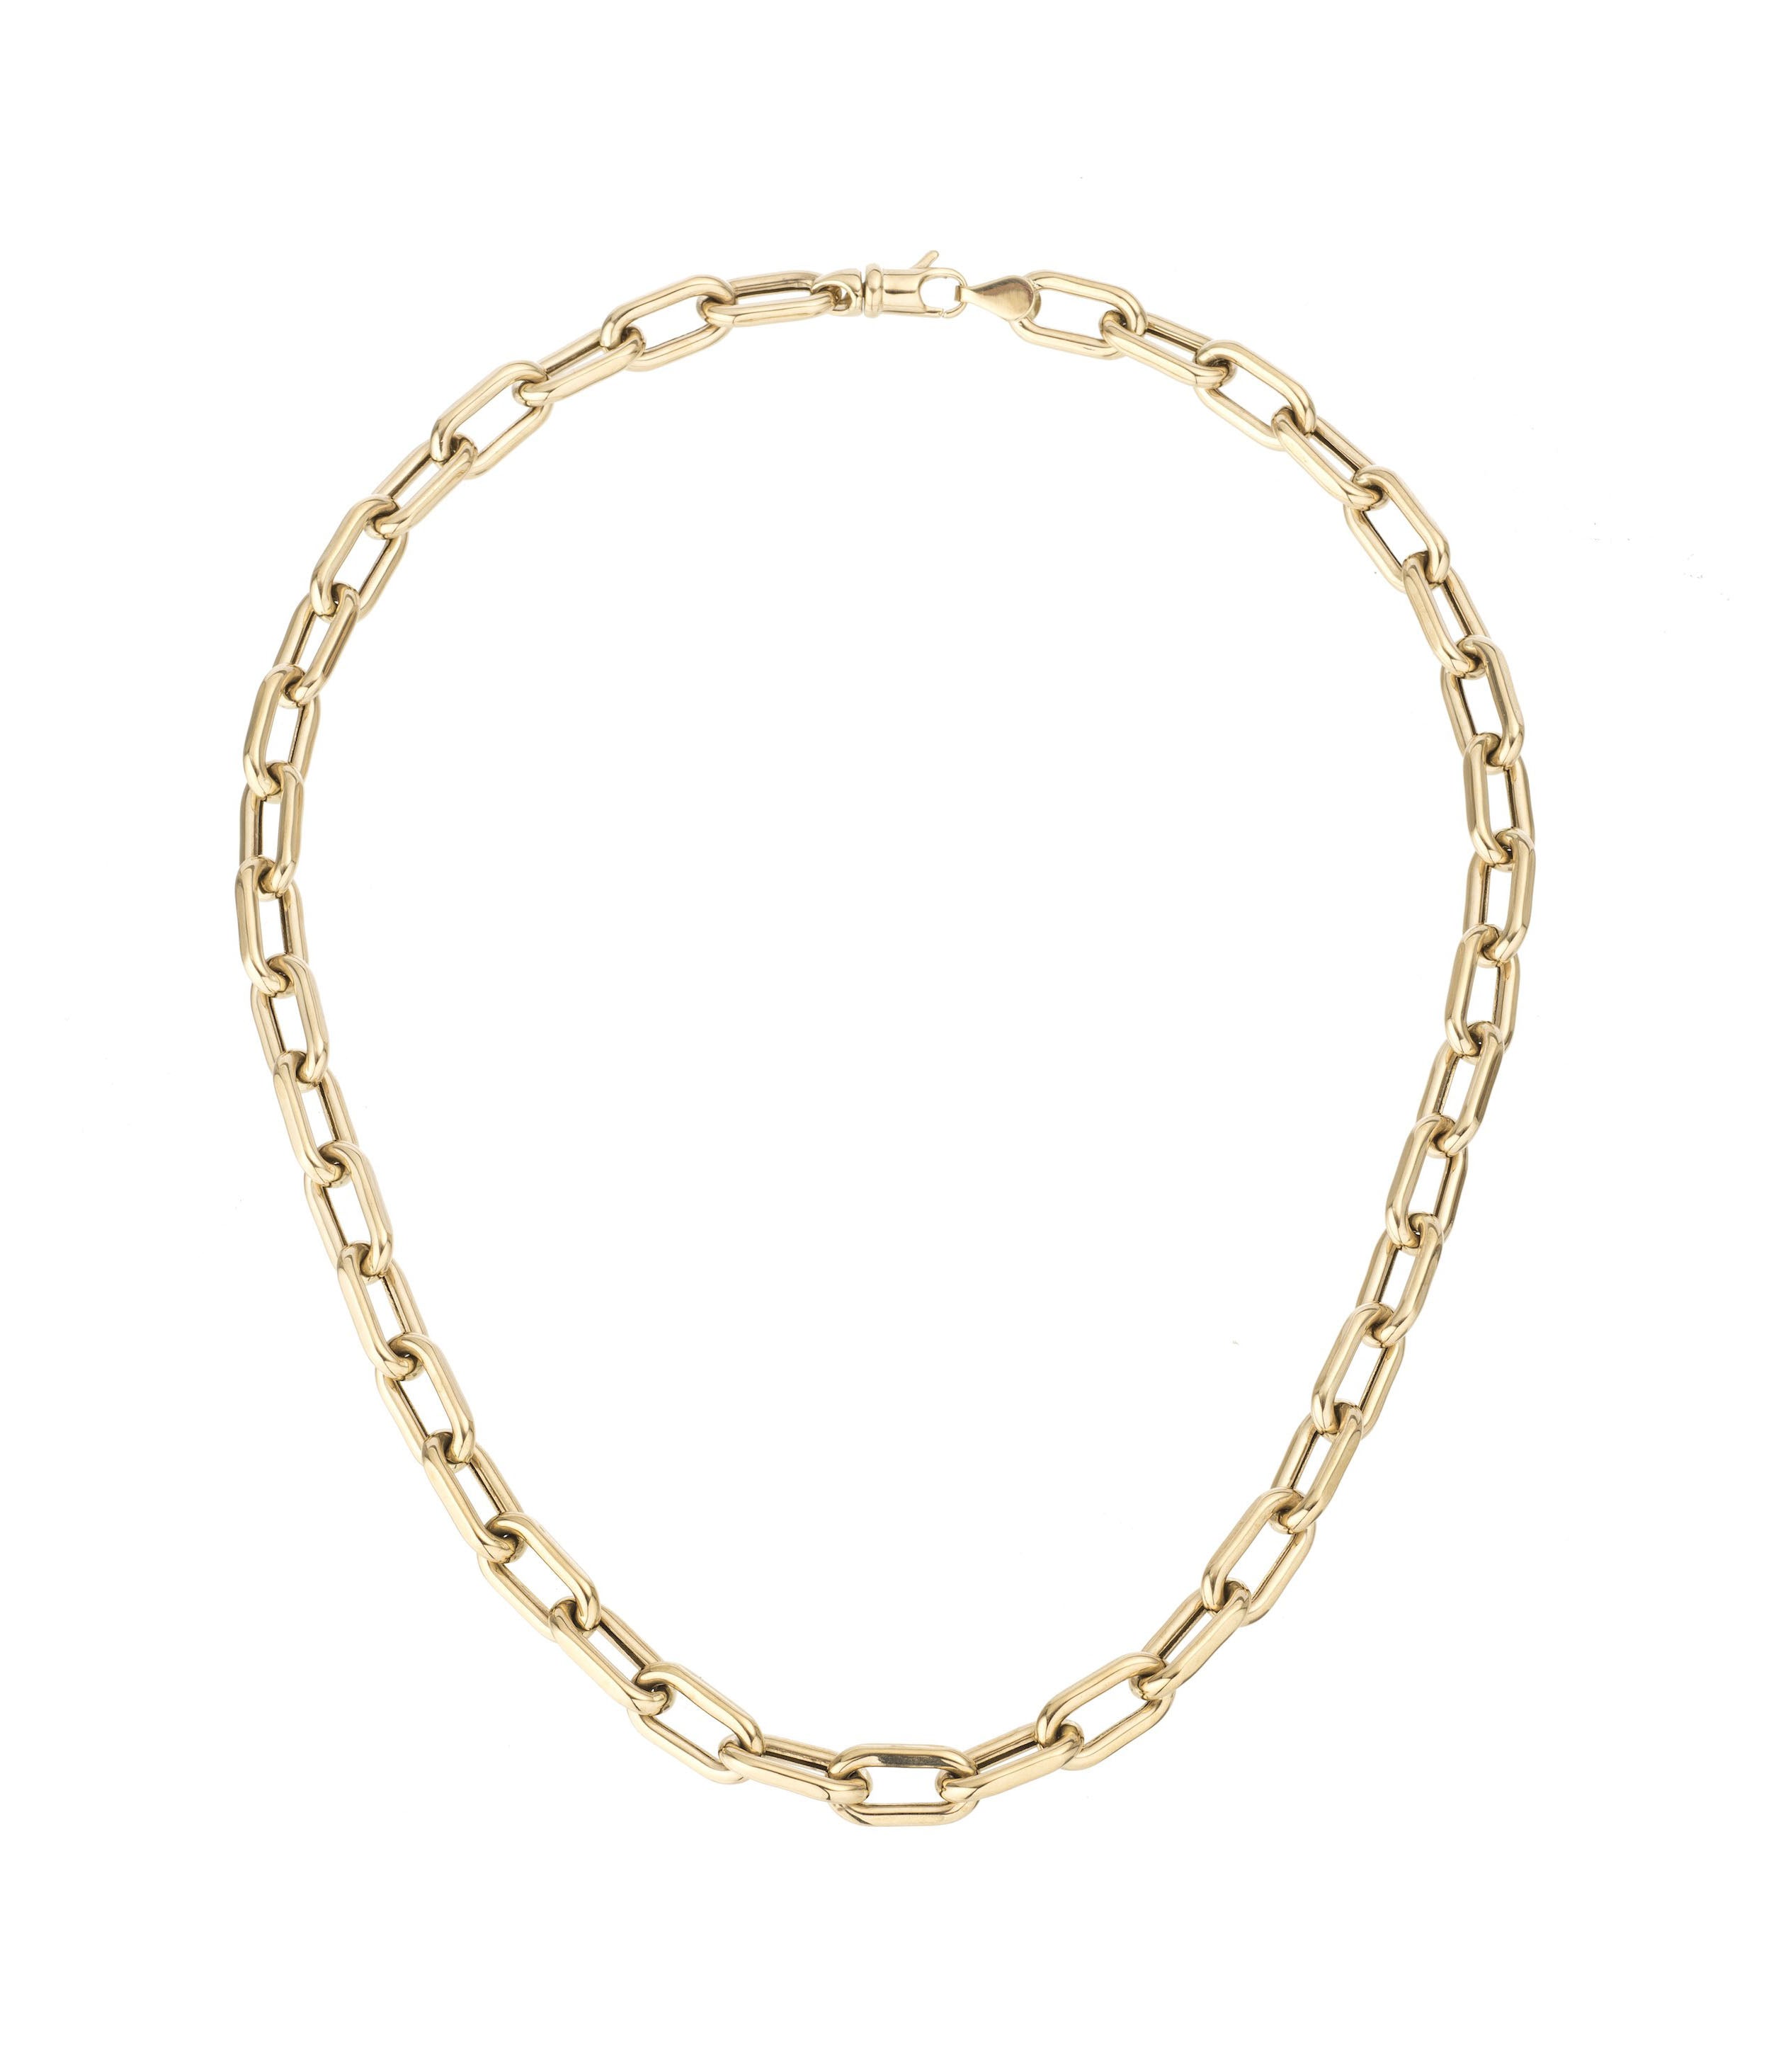 7mm Italian Chain Link Necklace in Yellow Gold